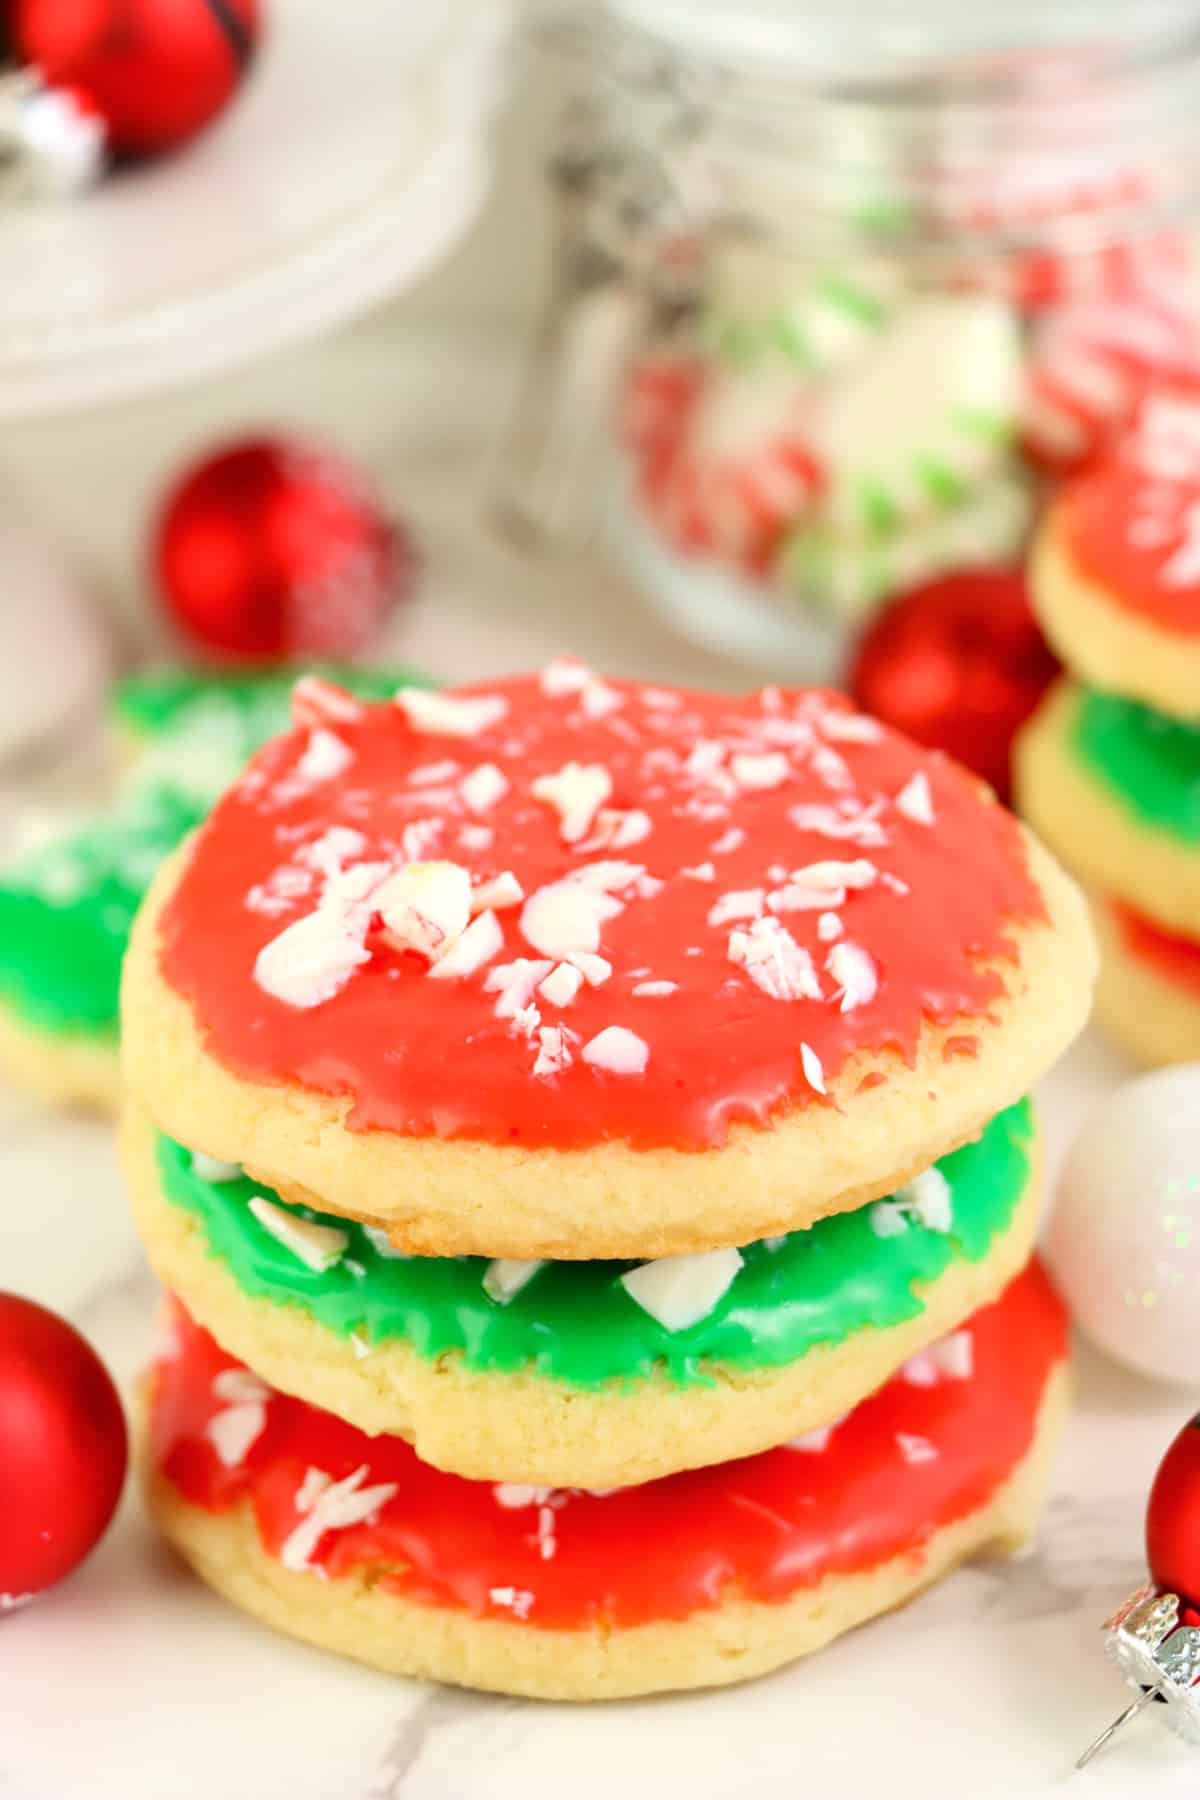 Christmas Sugar Cookies are soft and light sugar cookies dipped in vibrant frosting and topped with crushed mints. Easy holiday sugar cookie recipe that is perfect for parties and goody platters. No chilling, rolling out the dough or cutting out any cookies!